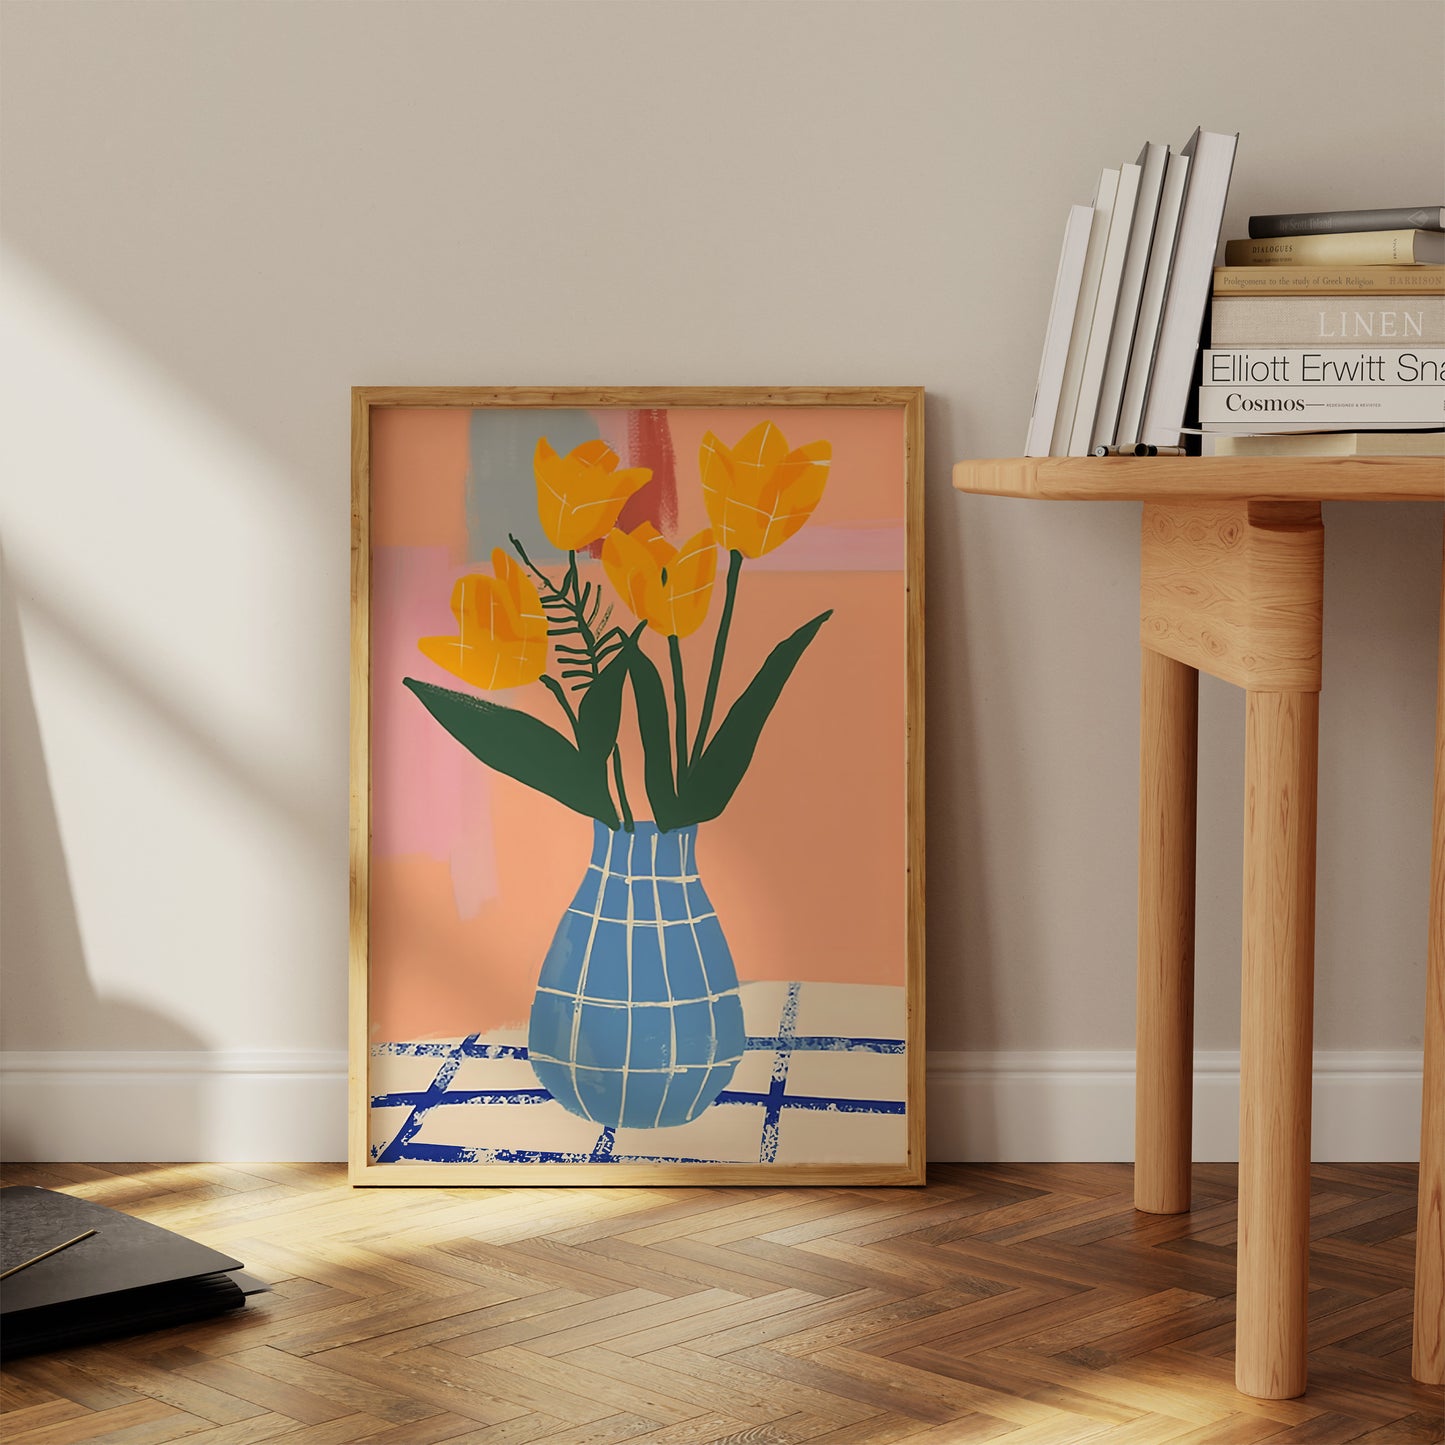 A framed poster of yellow tulips in a blue vase, next to books on a wooden floor.